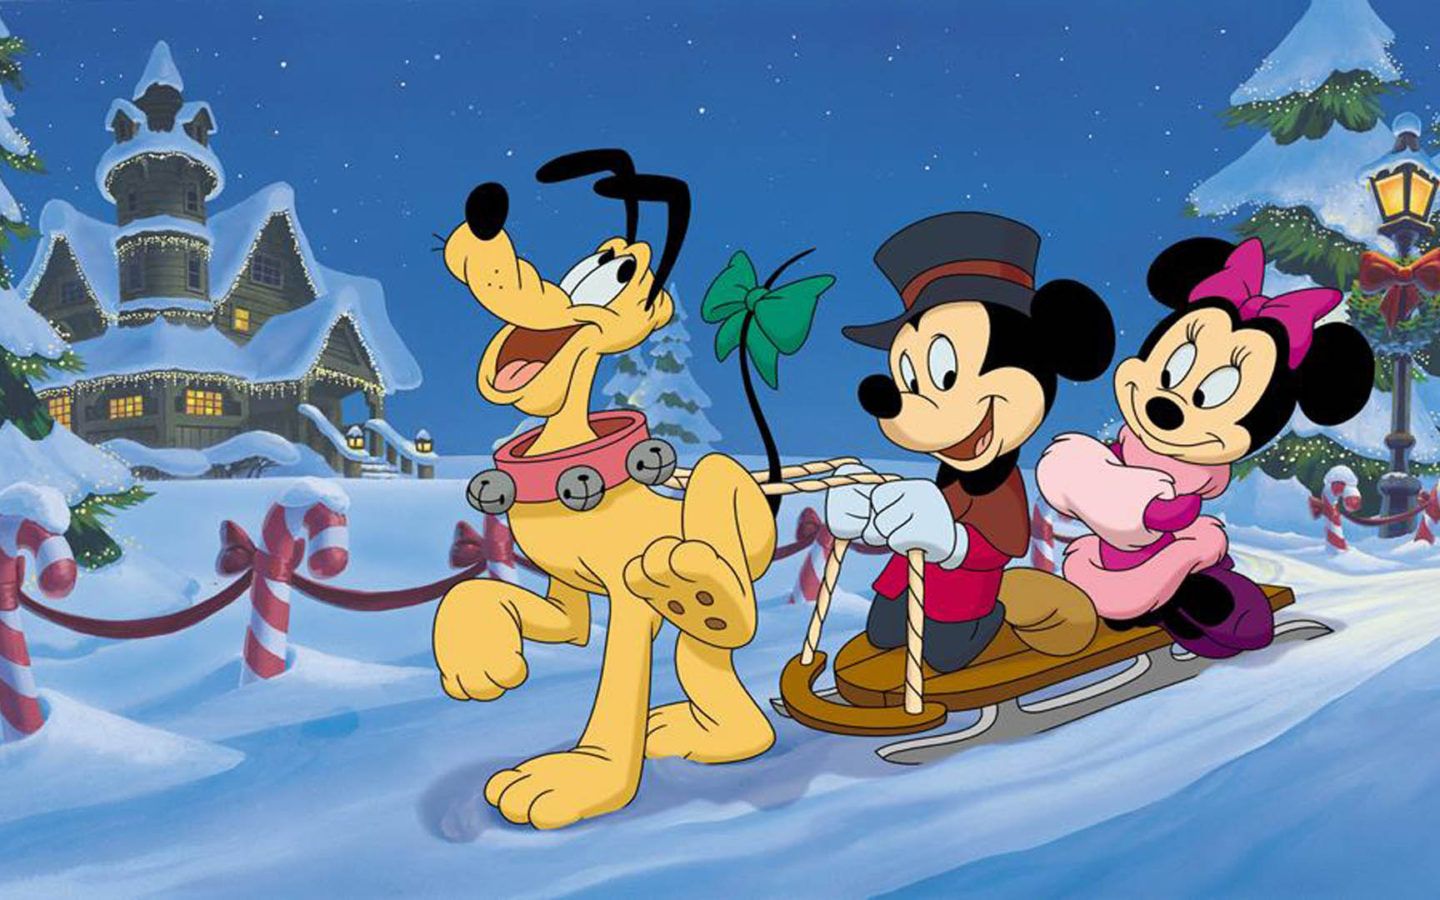 Winter Sledding With Pluto Mickey And Minnie Mouse Cartoons Christmas Wallpaper HD 1920x1080, Wallpaper13.com